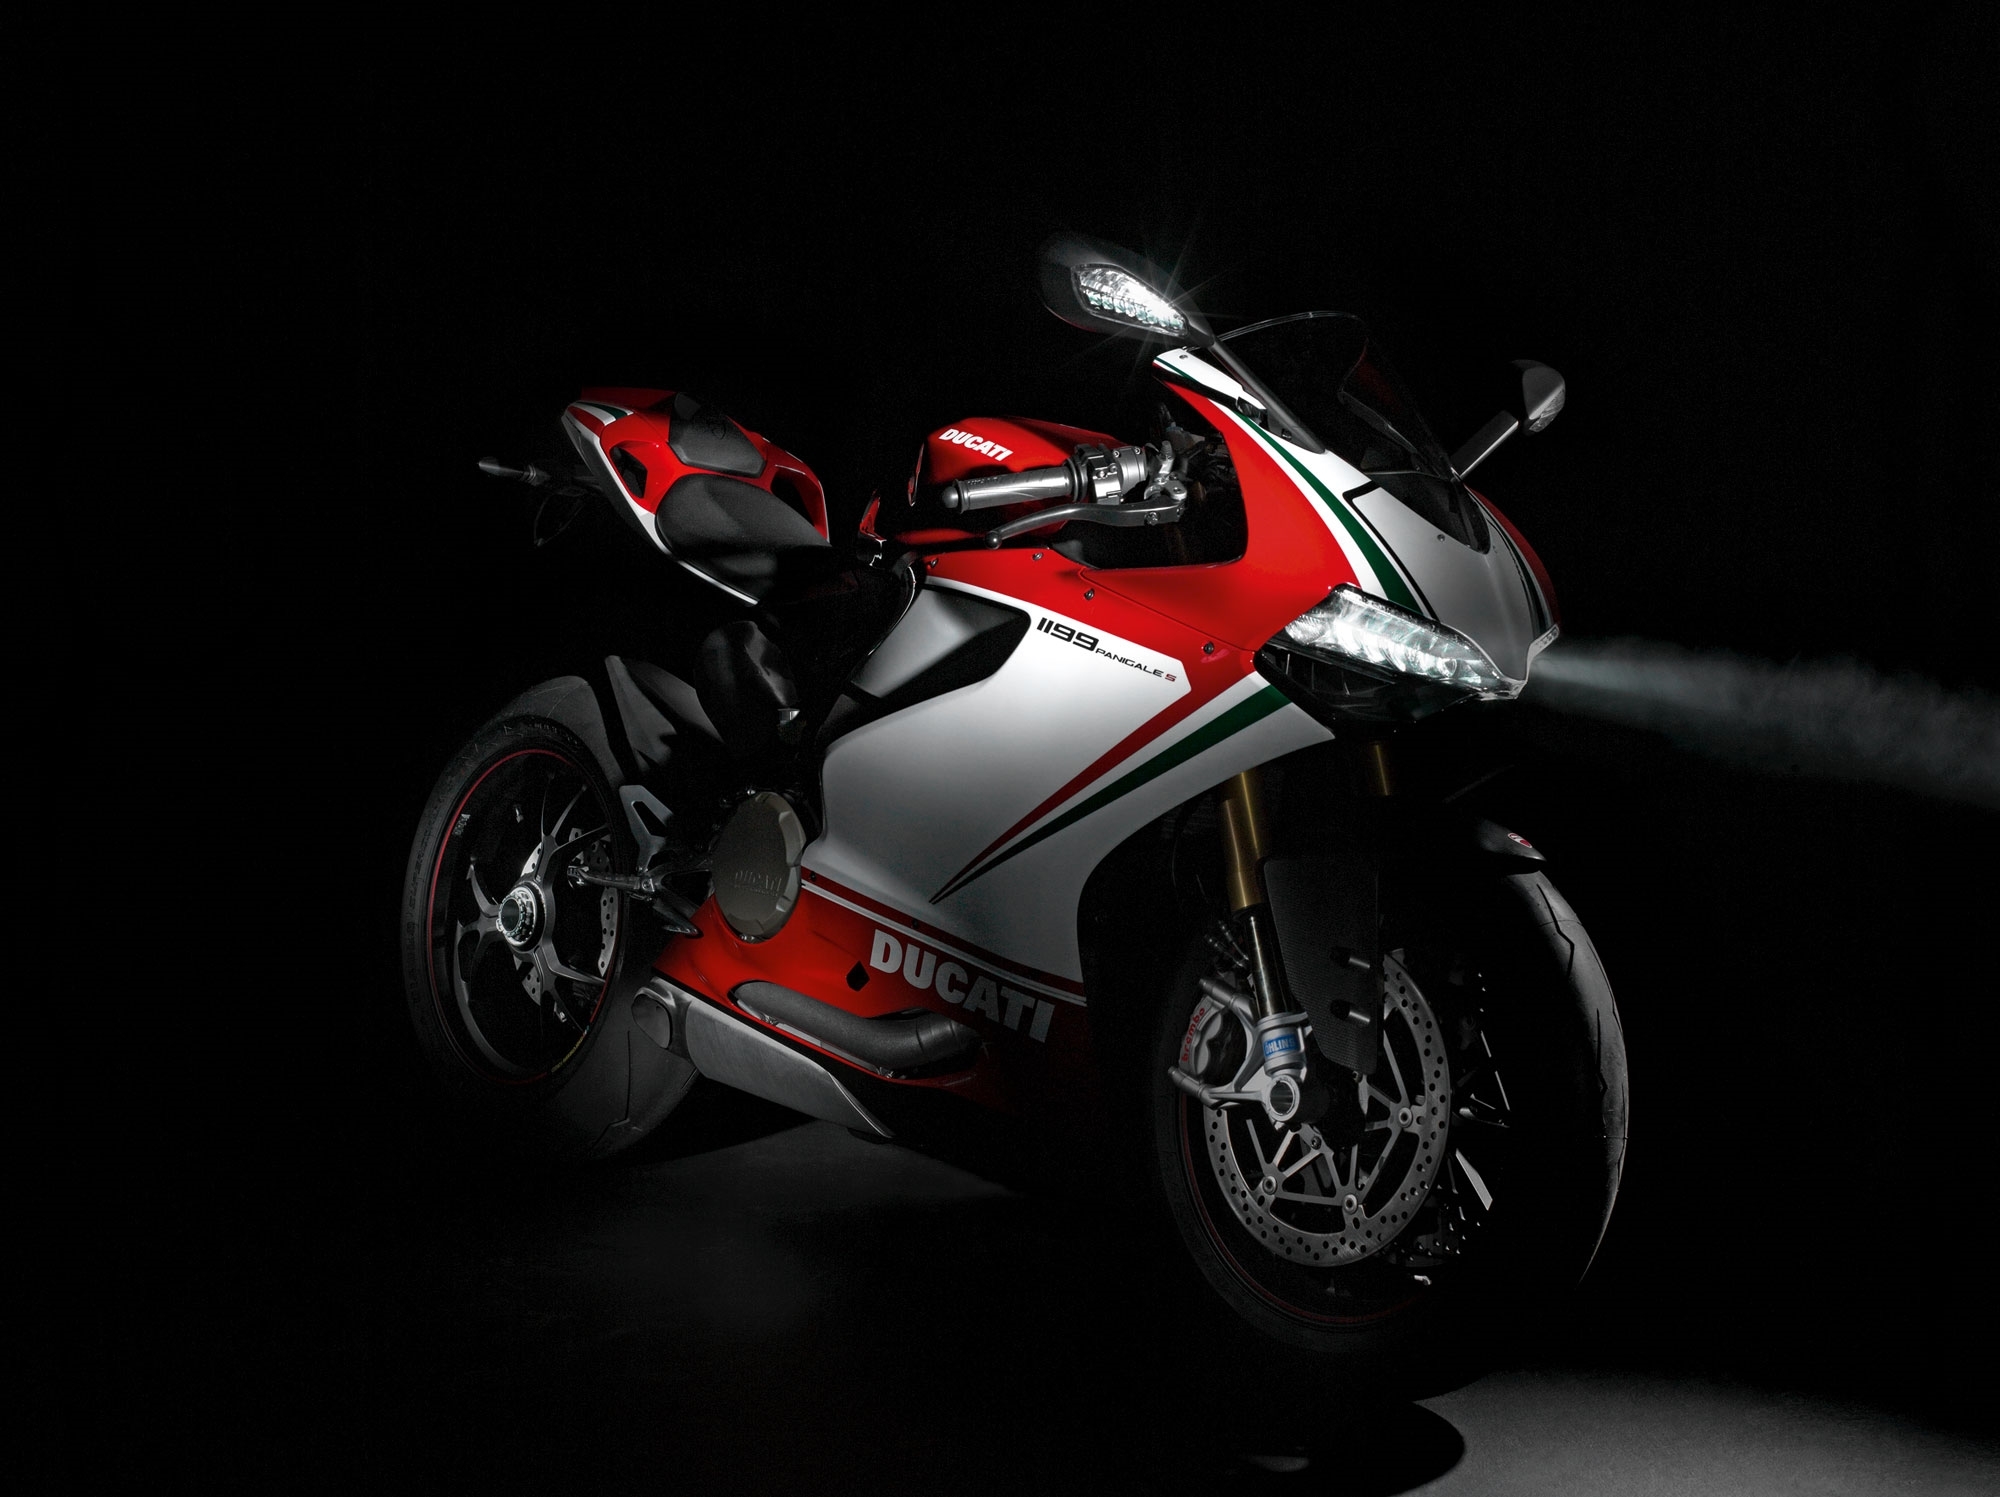 Ducati Superbike Wallpapers For Android